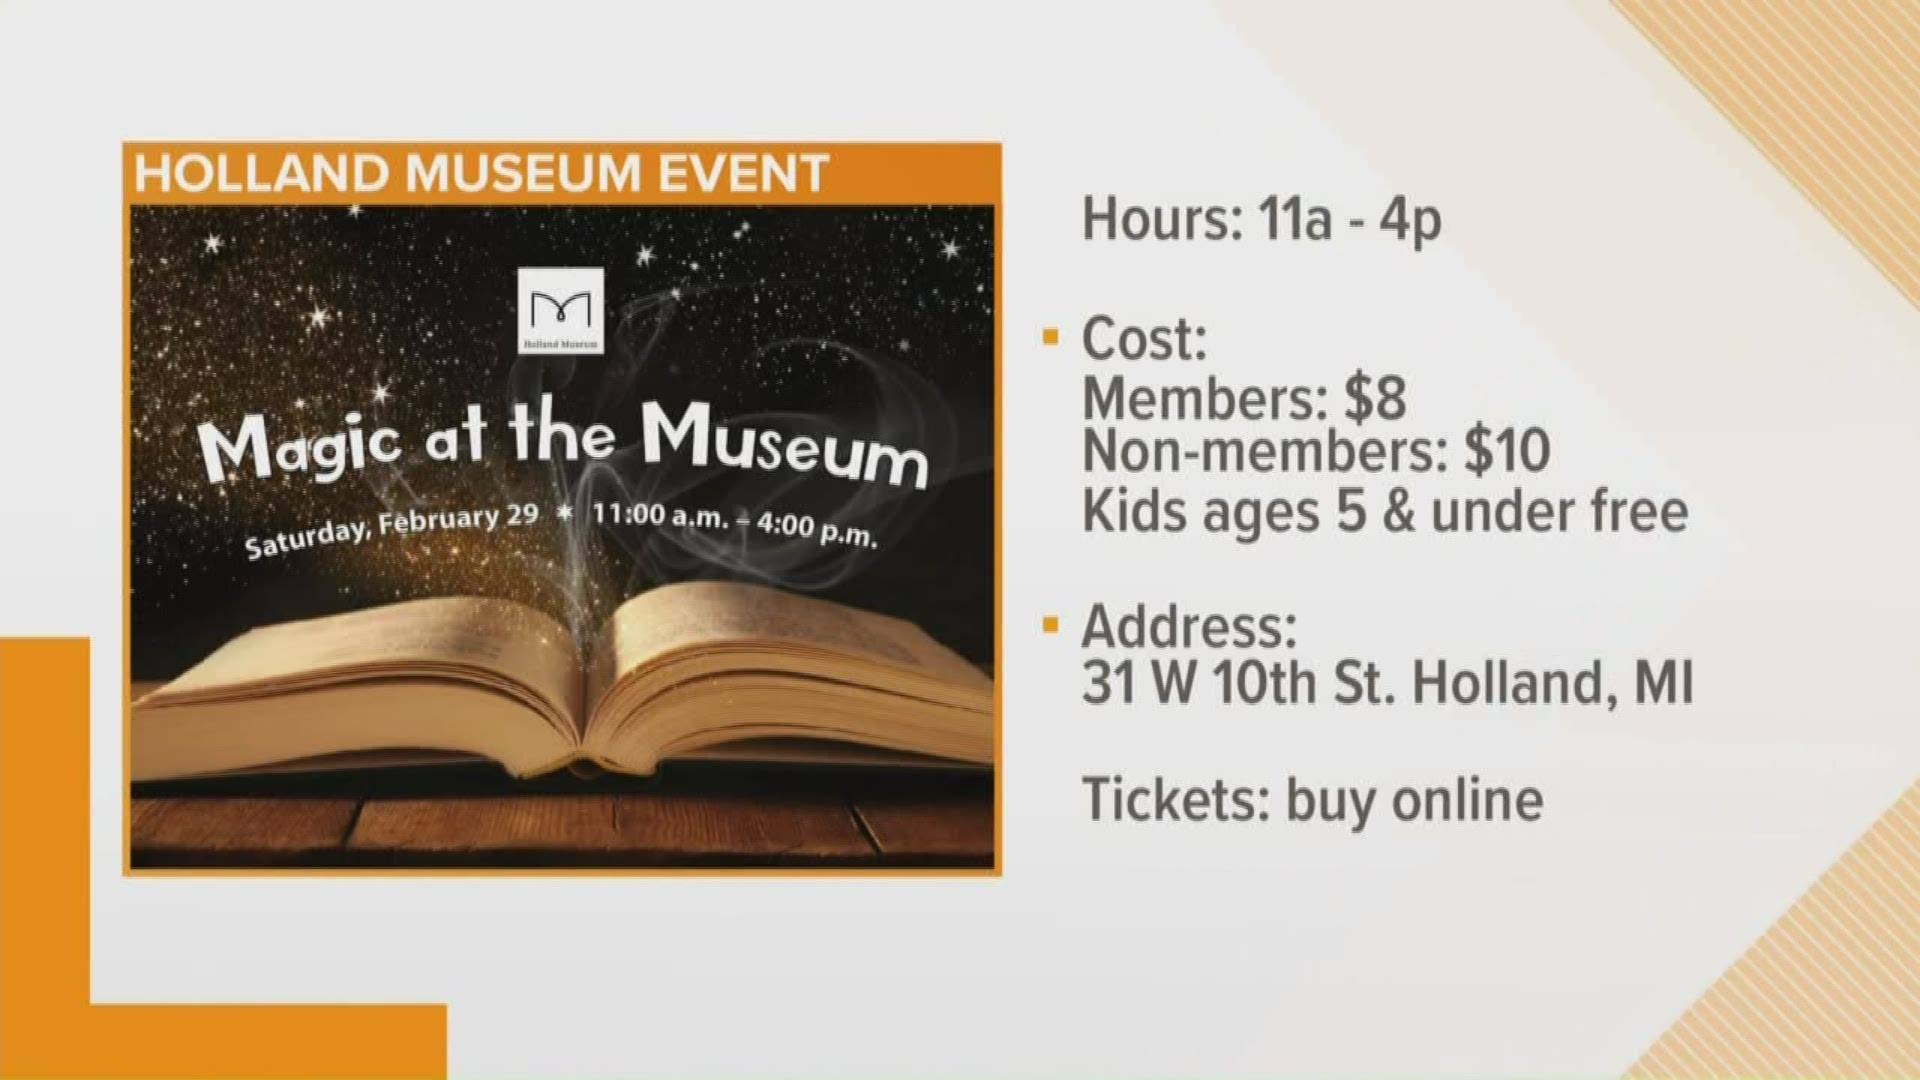 The Holland Museum will be magical this weekend.